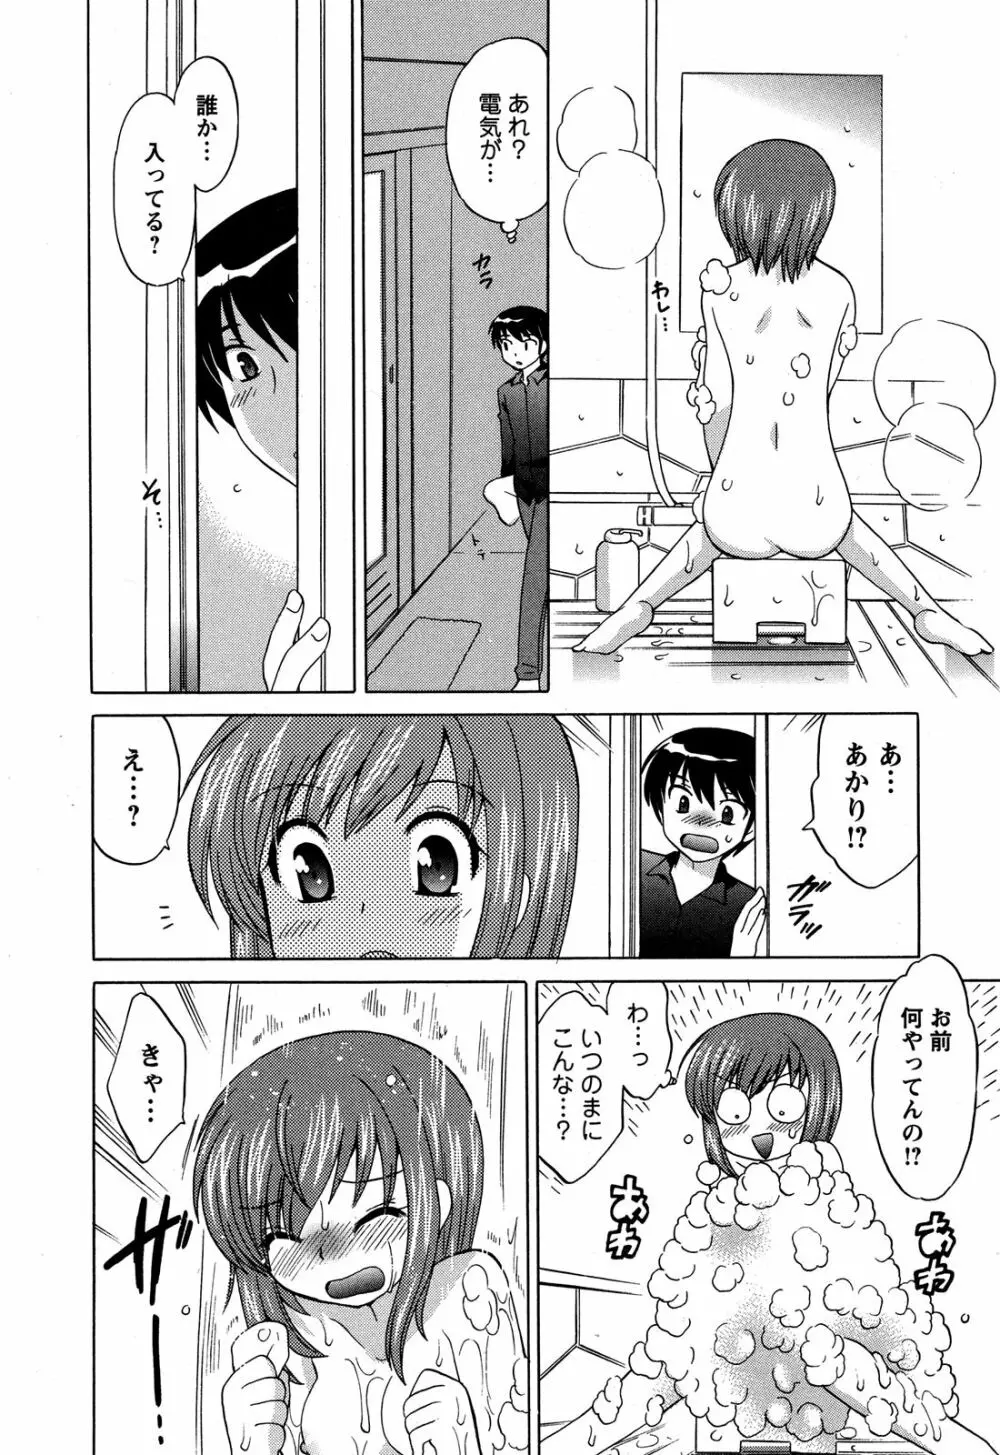 Colorfulこみゅーん☆ 第4巻 Page.44